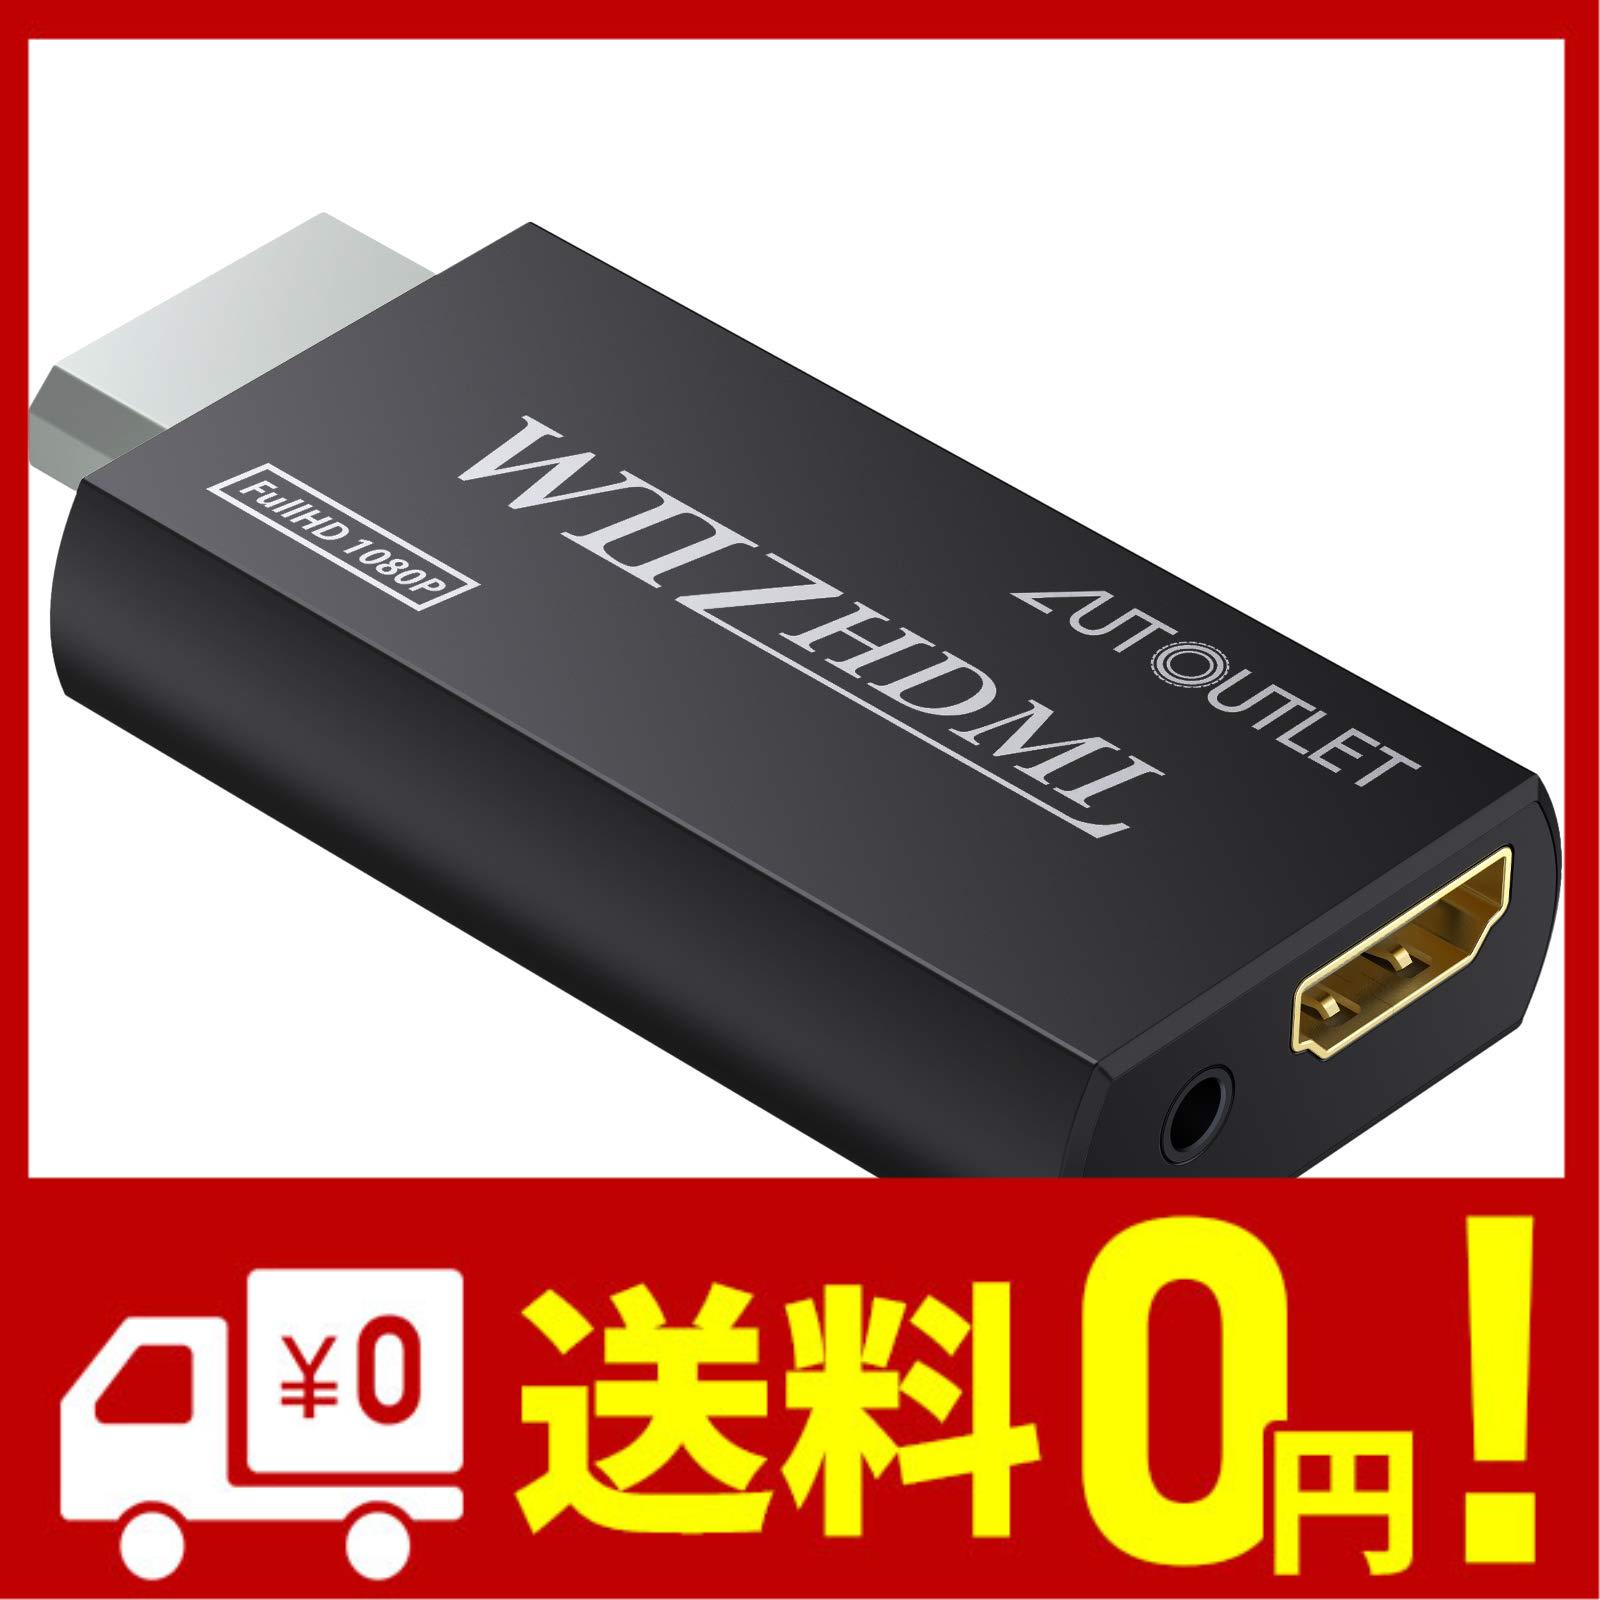 AUTOUTLET Wii to Hdmi アダプタ コンバーター Wii2HDMI アダプター ビデオ オーディオ 3.5mm 720p 1080pに対応 NtdWiiディスプレイモー